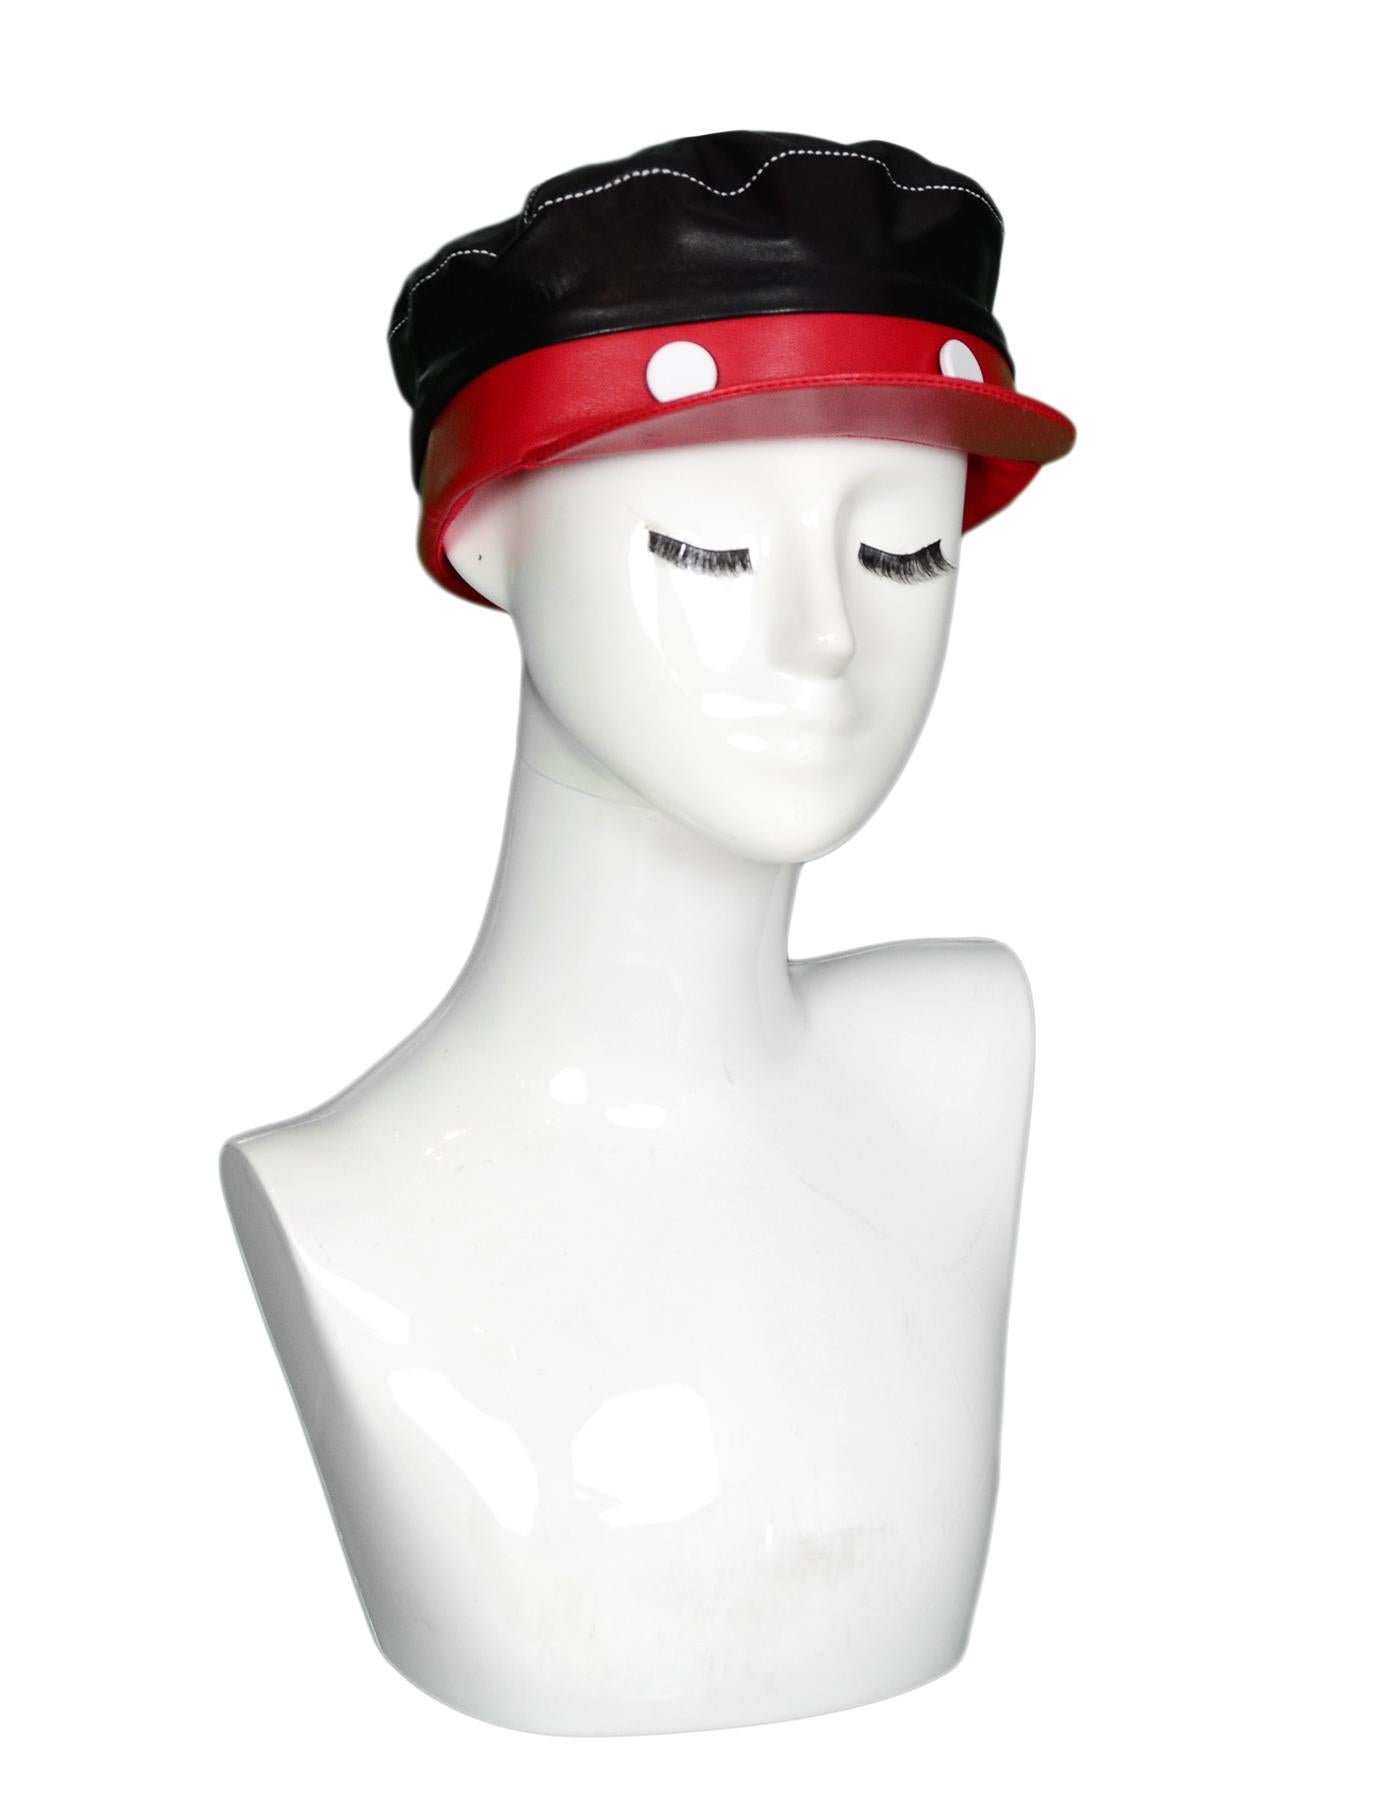 Gigi Burris Black/Red Disney 1928 Willie Mickey Mouse Leather Cap Hat

Color: Black/red
Materials: Leather
Lining: Yellow textile
Closure/Opening: Pull on
Overall Condition: Excellent condition with original tags attached
Estimated Retail: $410 +